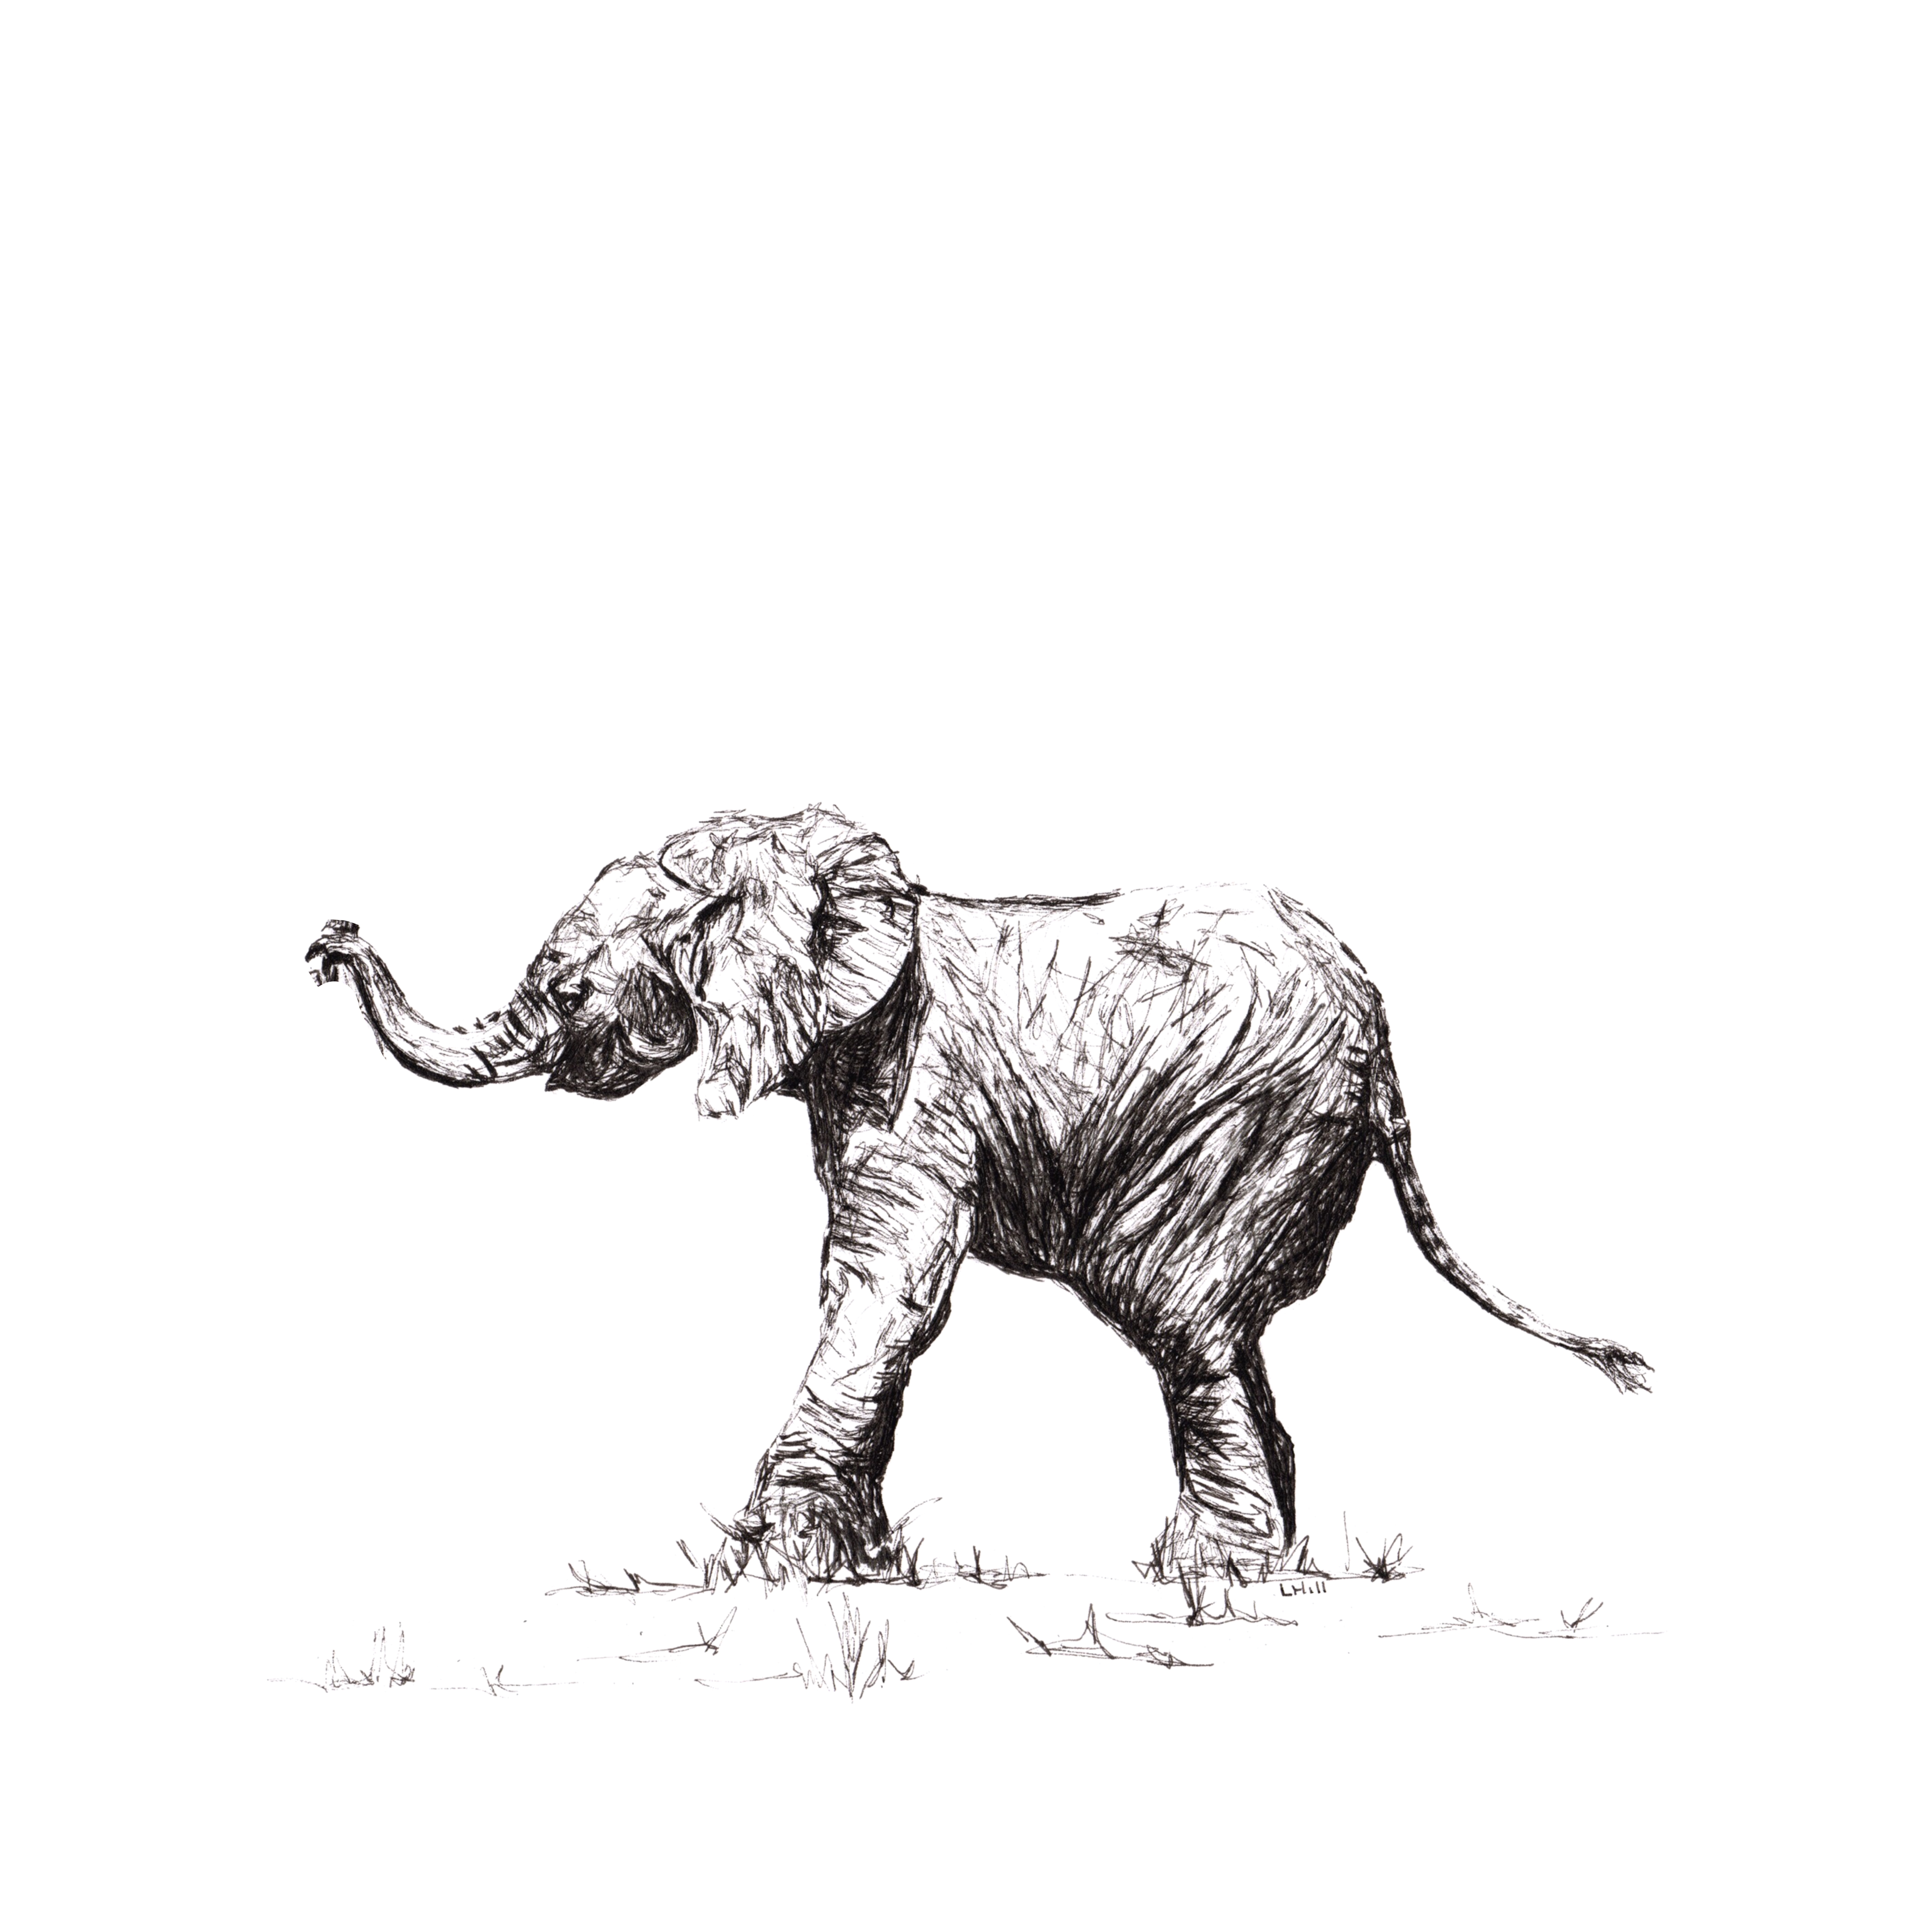 Baby Elephant pen and ink illustration by Louisa Hill